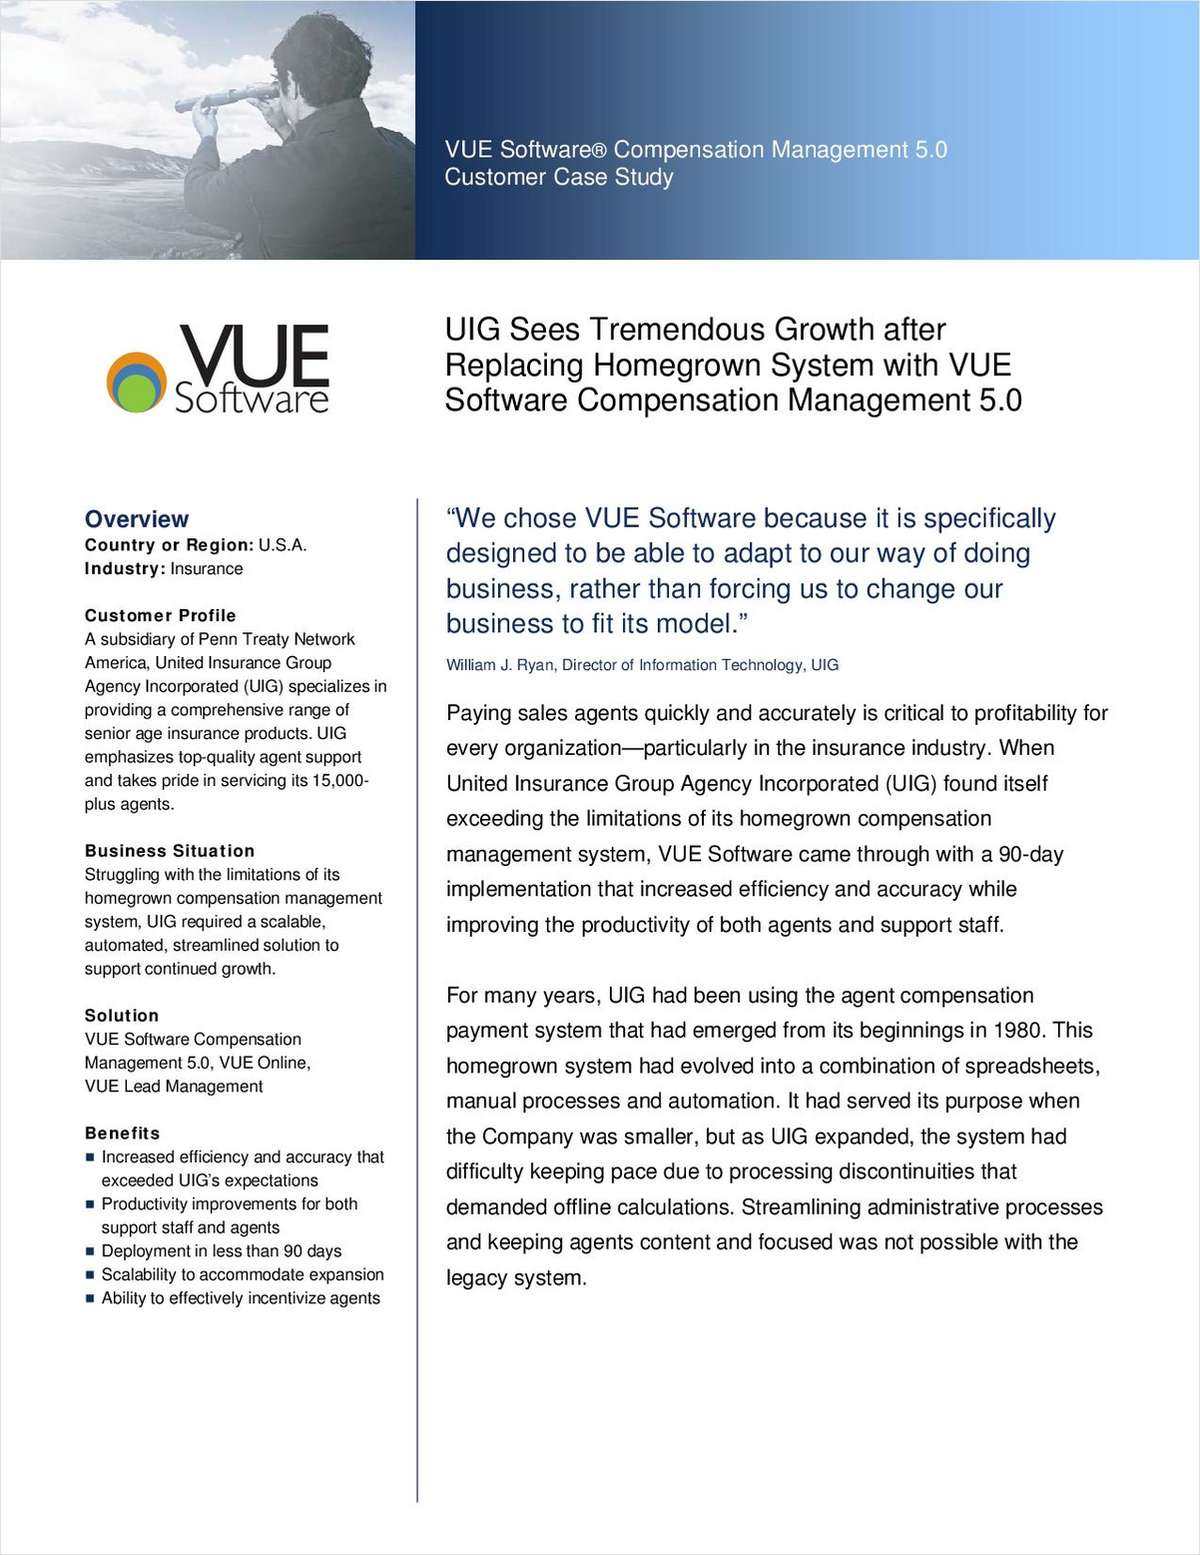 UIG Sees Tremendous Growth after Replacing Homegrown System with VUE Software Compensation Management 5.0